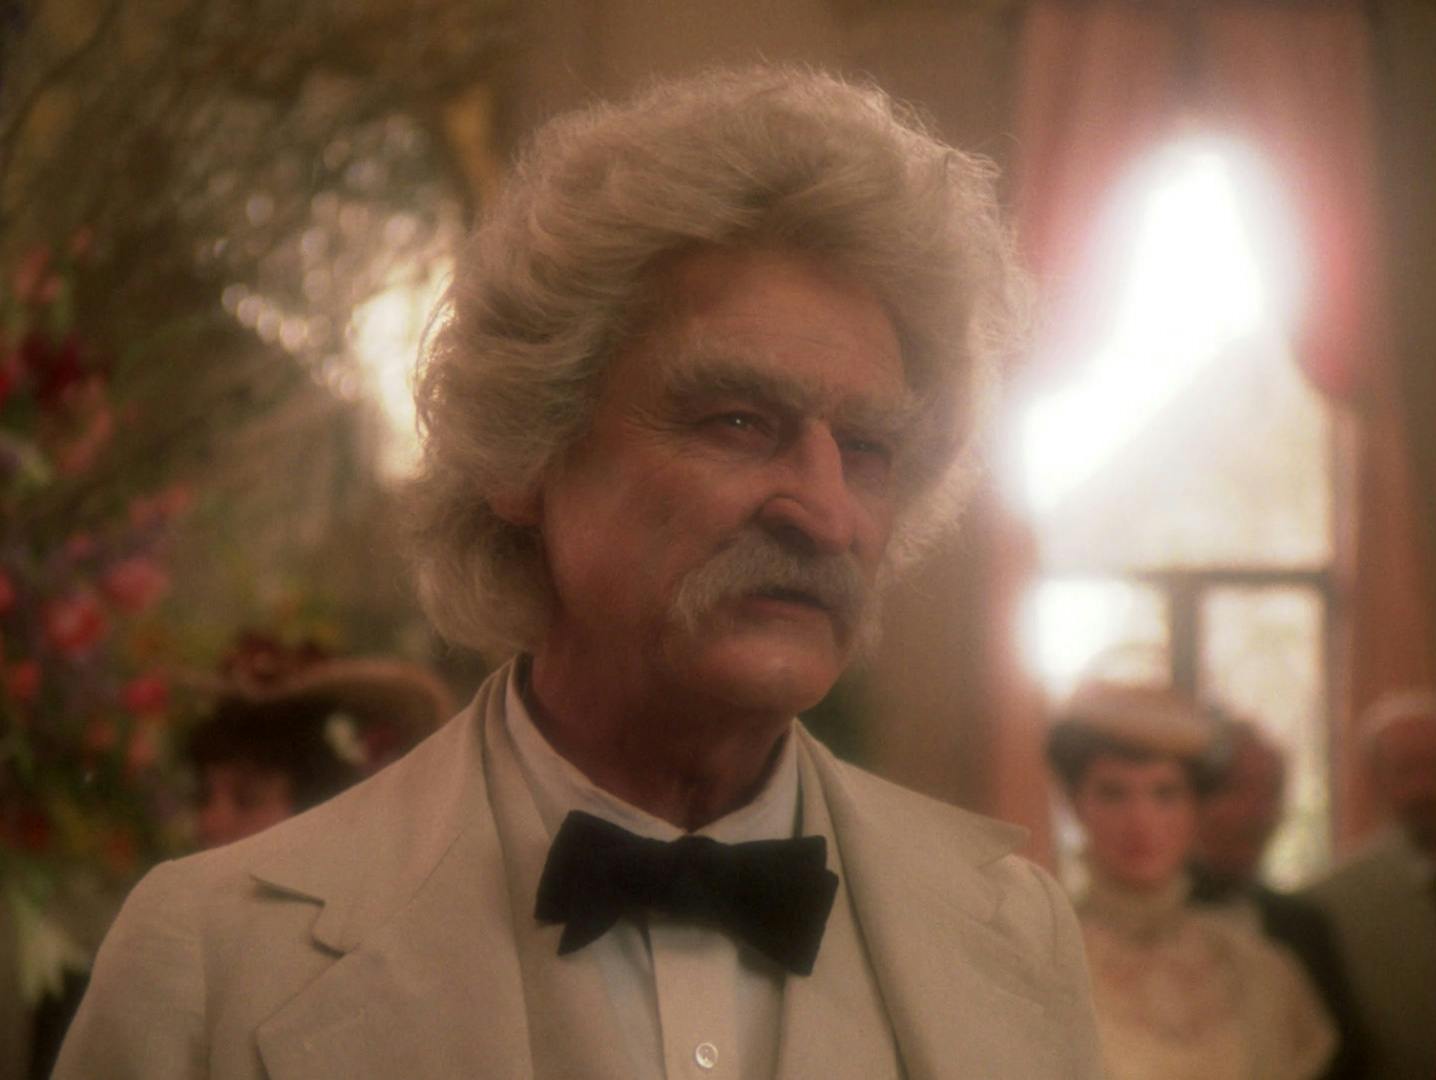 Samuel Clemens aka Mark Twain holds court at a literary reception in 'Time's Arrow'